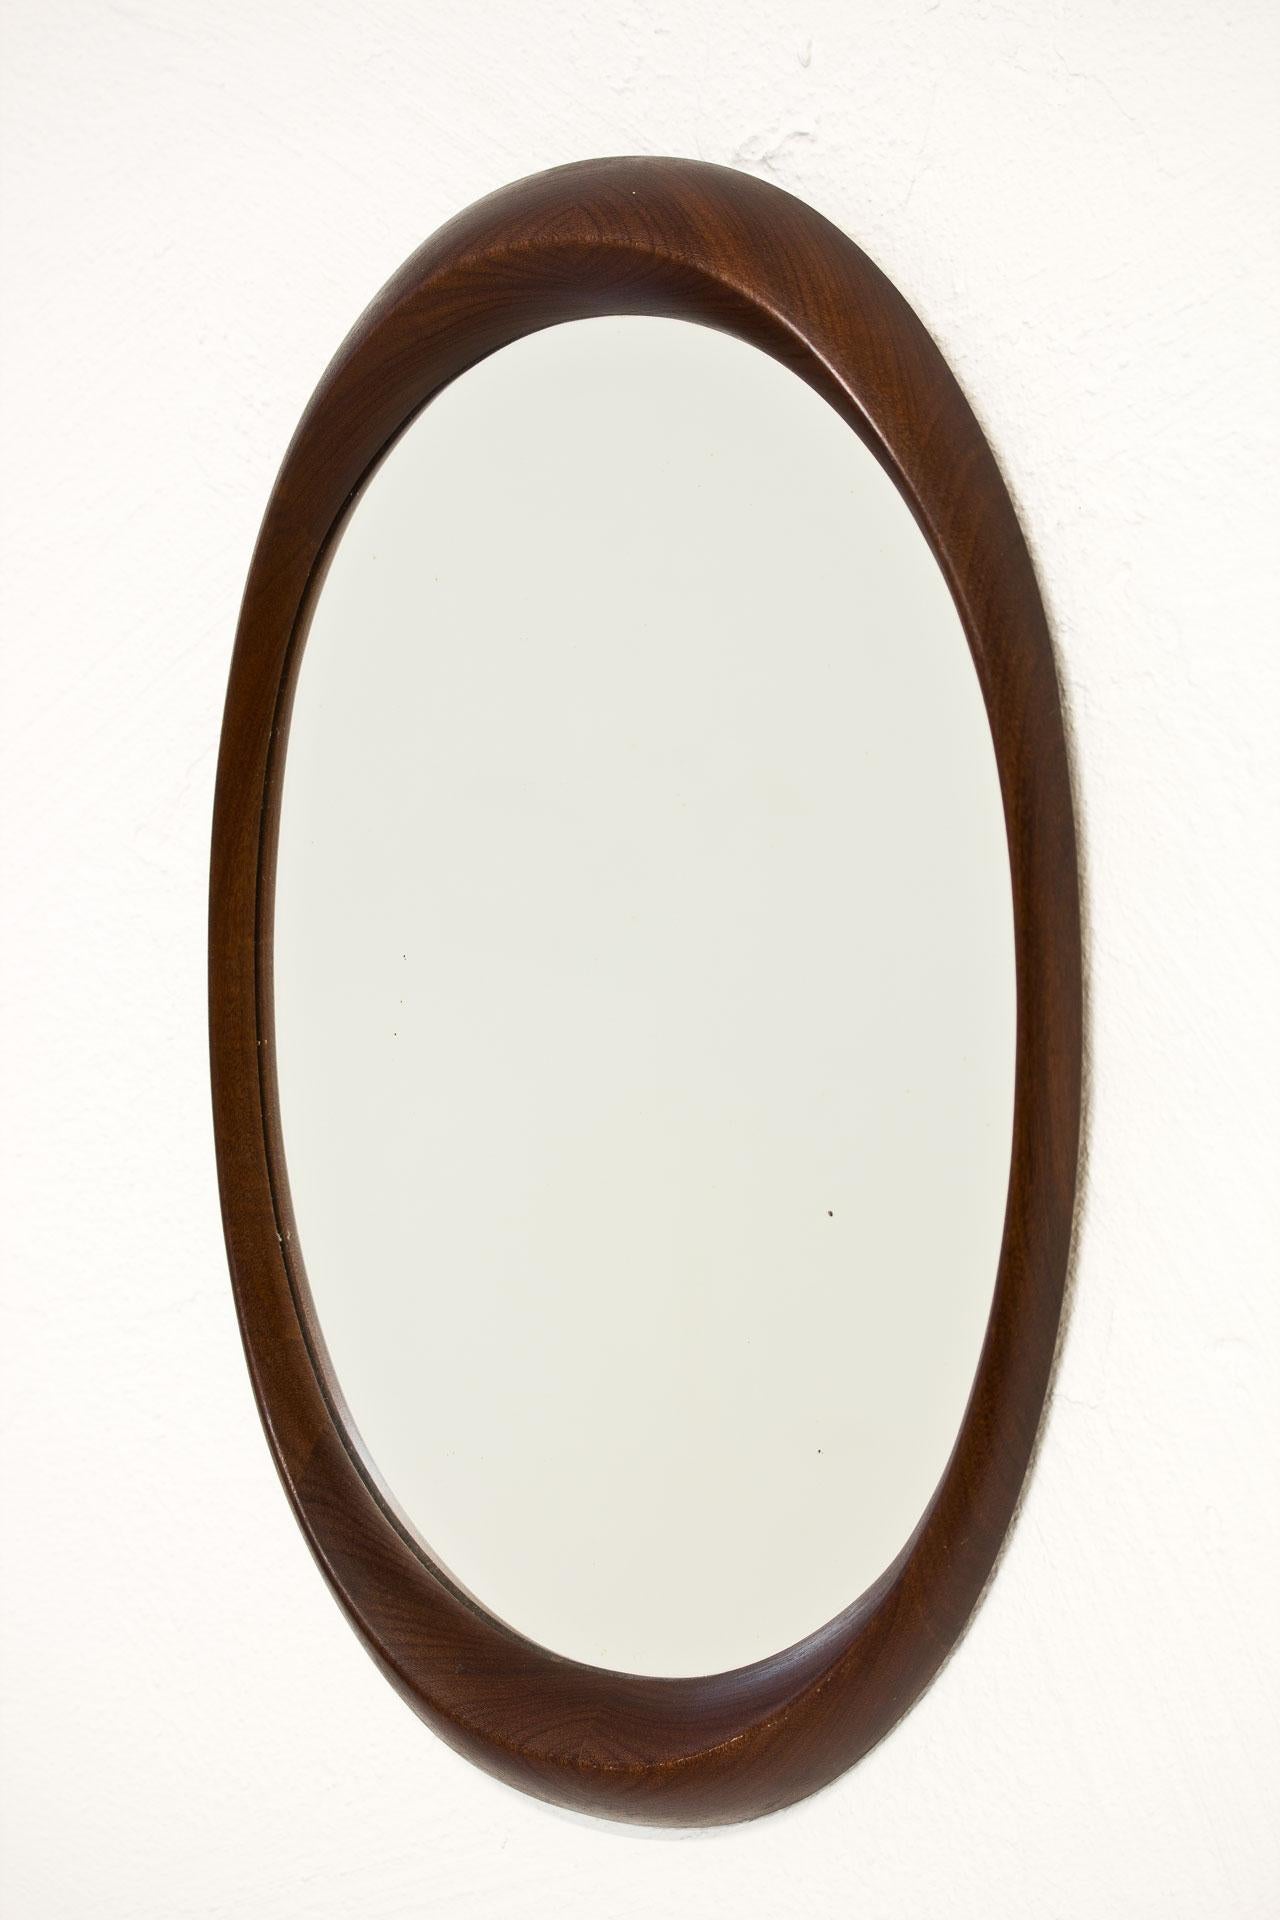 Oval shaped wall mirror from unknown maker. Made in Sweden during the 1960s. Frame in Afromosia (African wood) with nice curves and joinery.
    